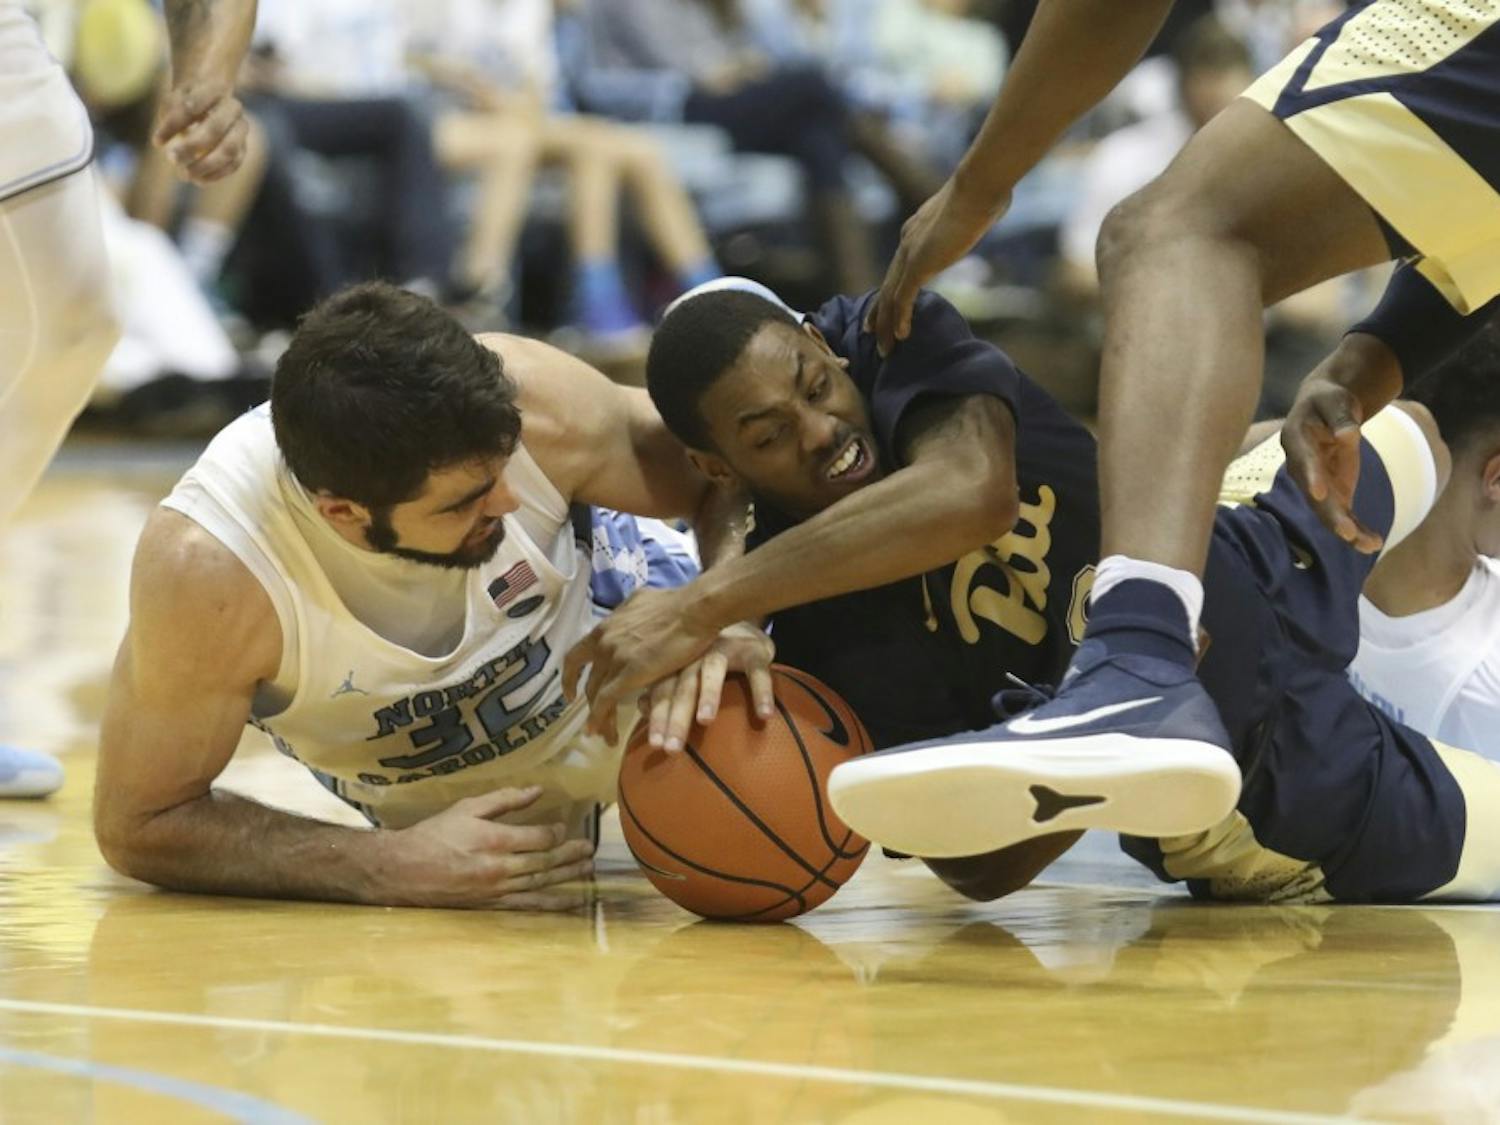 Forward Luke Maye (32) fights for possession of a loose ball against Pittsburgh on Feb. 3 in the Smith Center.